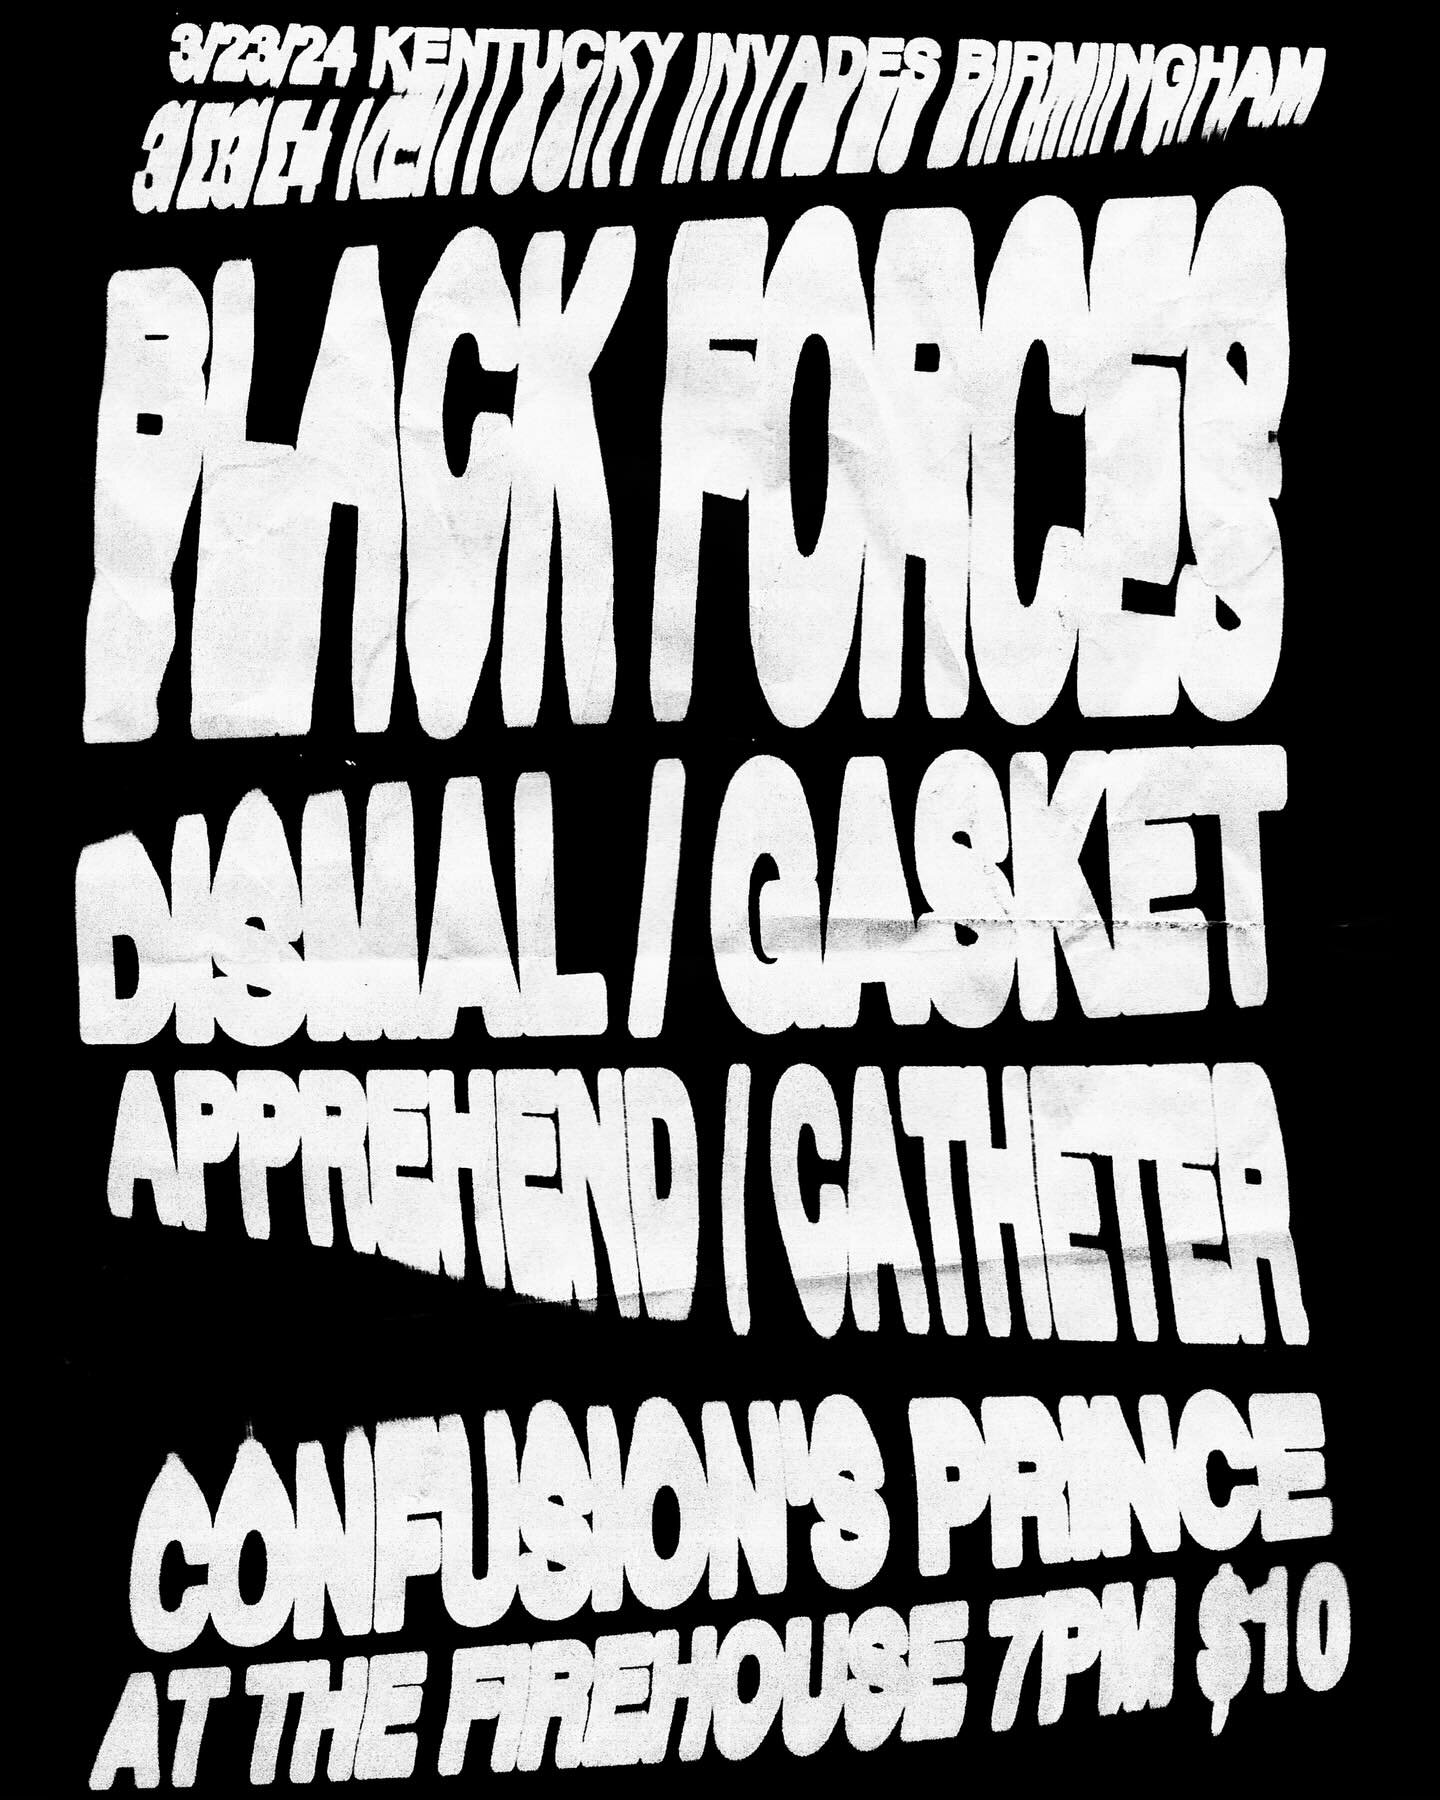 Don&rsquo;t even really need a caption for this one y&rsquo;all already know what&rsquo;s up. Black Forces and Dismal from KY, Gasket from MD, don&rsquo;t miss it